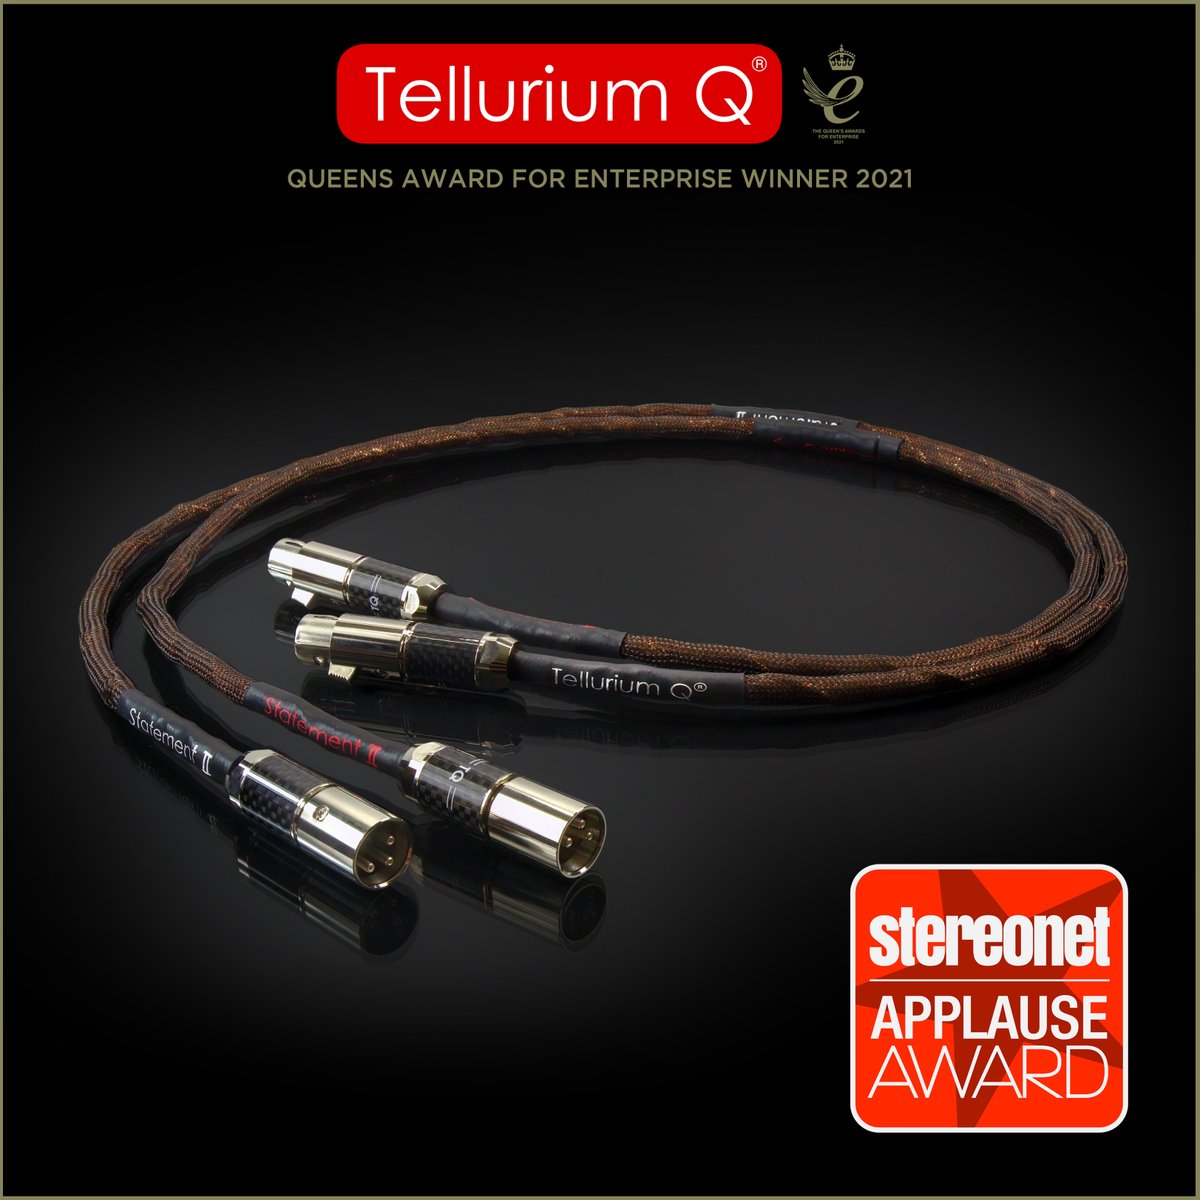 'This new flagship Tellurium Q cable seemed to improve everything it touched – including my digital music library via my streamer'
Jay Garrett, Stereonet  read more: statement.telluriumq.com/xlr-cable/
Full review: stereonet.com/uk/reviews/tel…
#audiophiles #highendaudio #HiEndHiFi